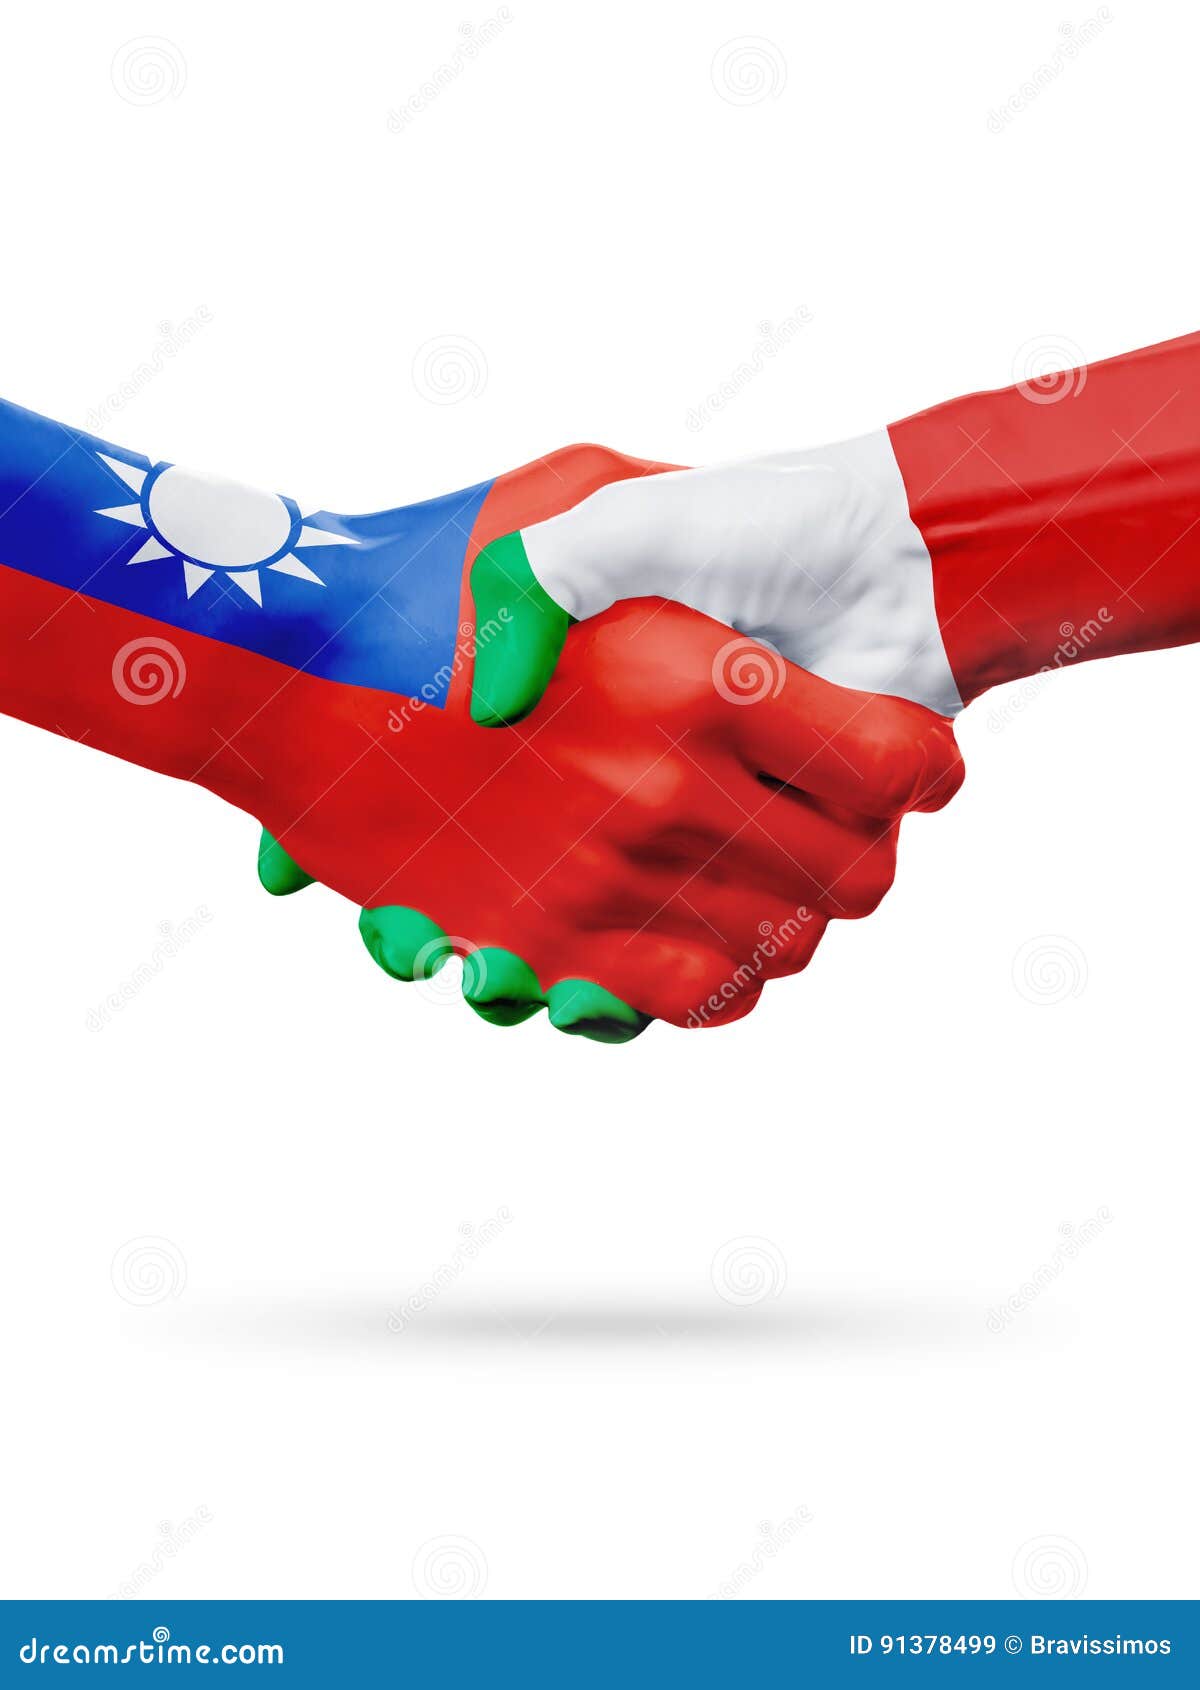 Flags Taiwan, Italy Countries, Partnership Friendship Handshake Concept.  Stock Image - Image of country, deal: 91378499